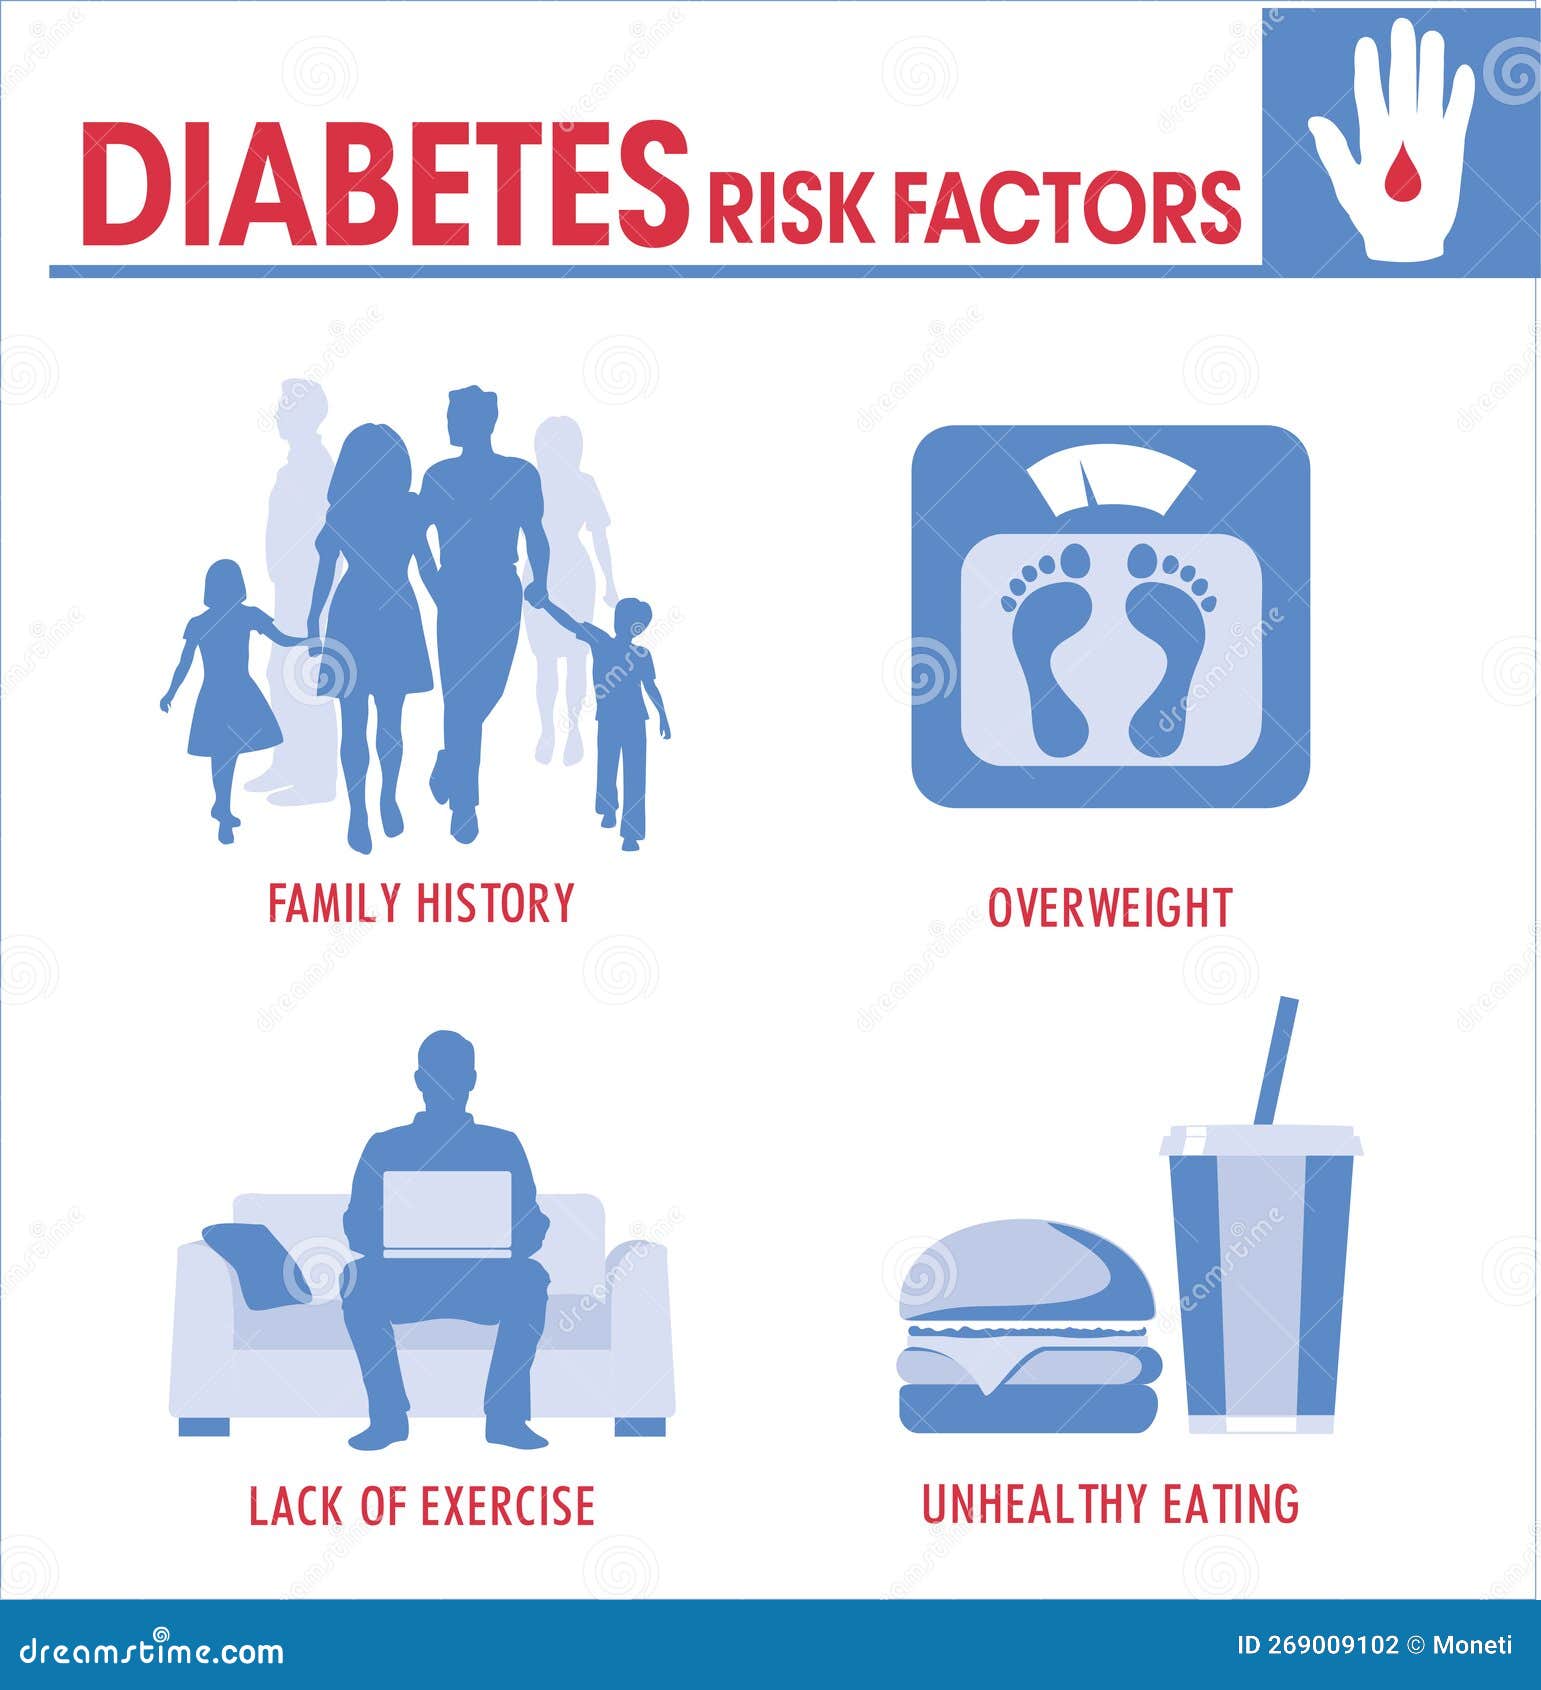 Diabetes Risk Factors Infographic Diabetes With Type 2 Has Many Risk